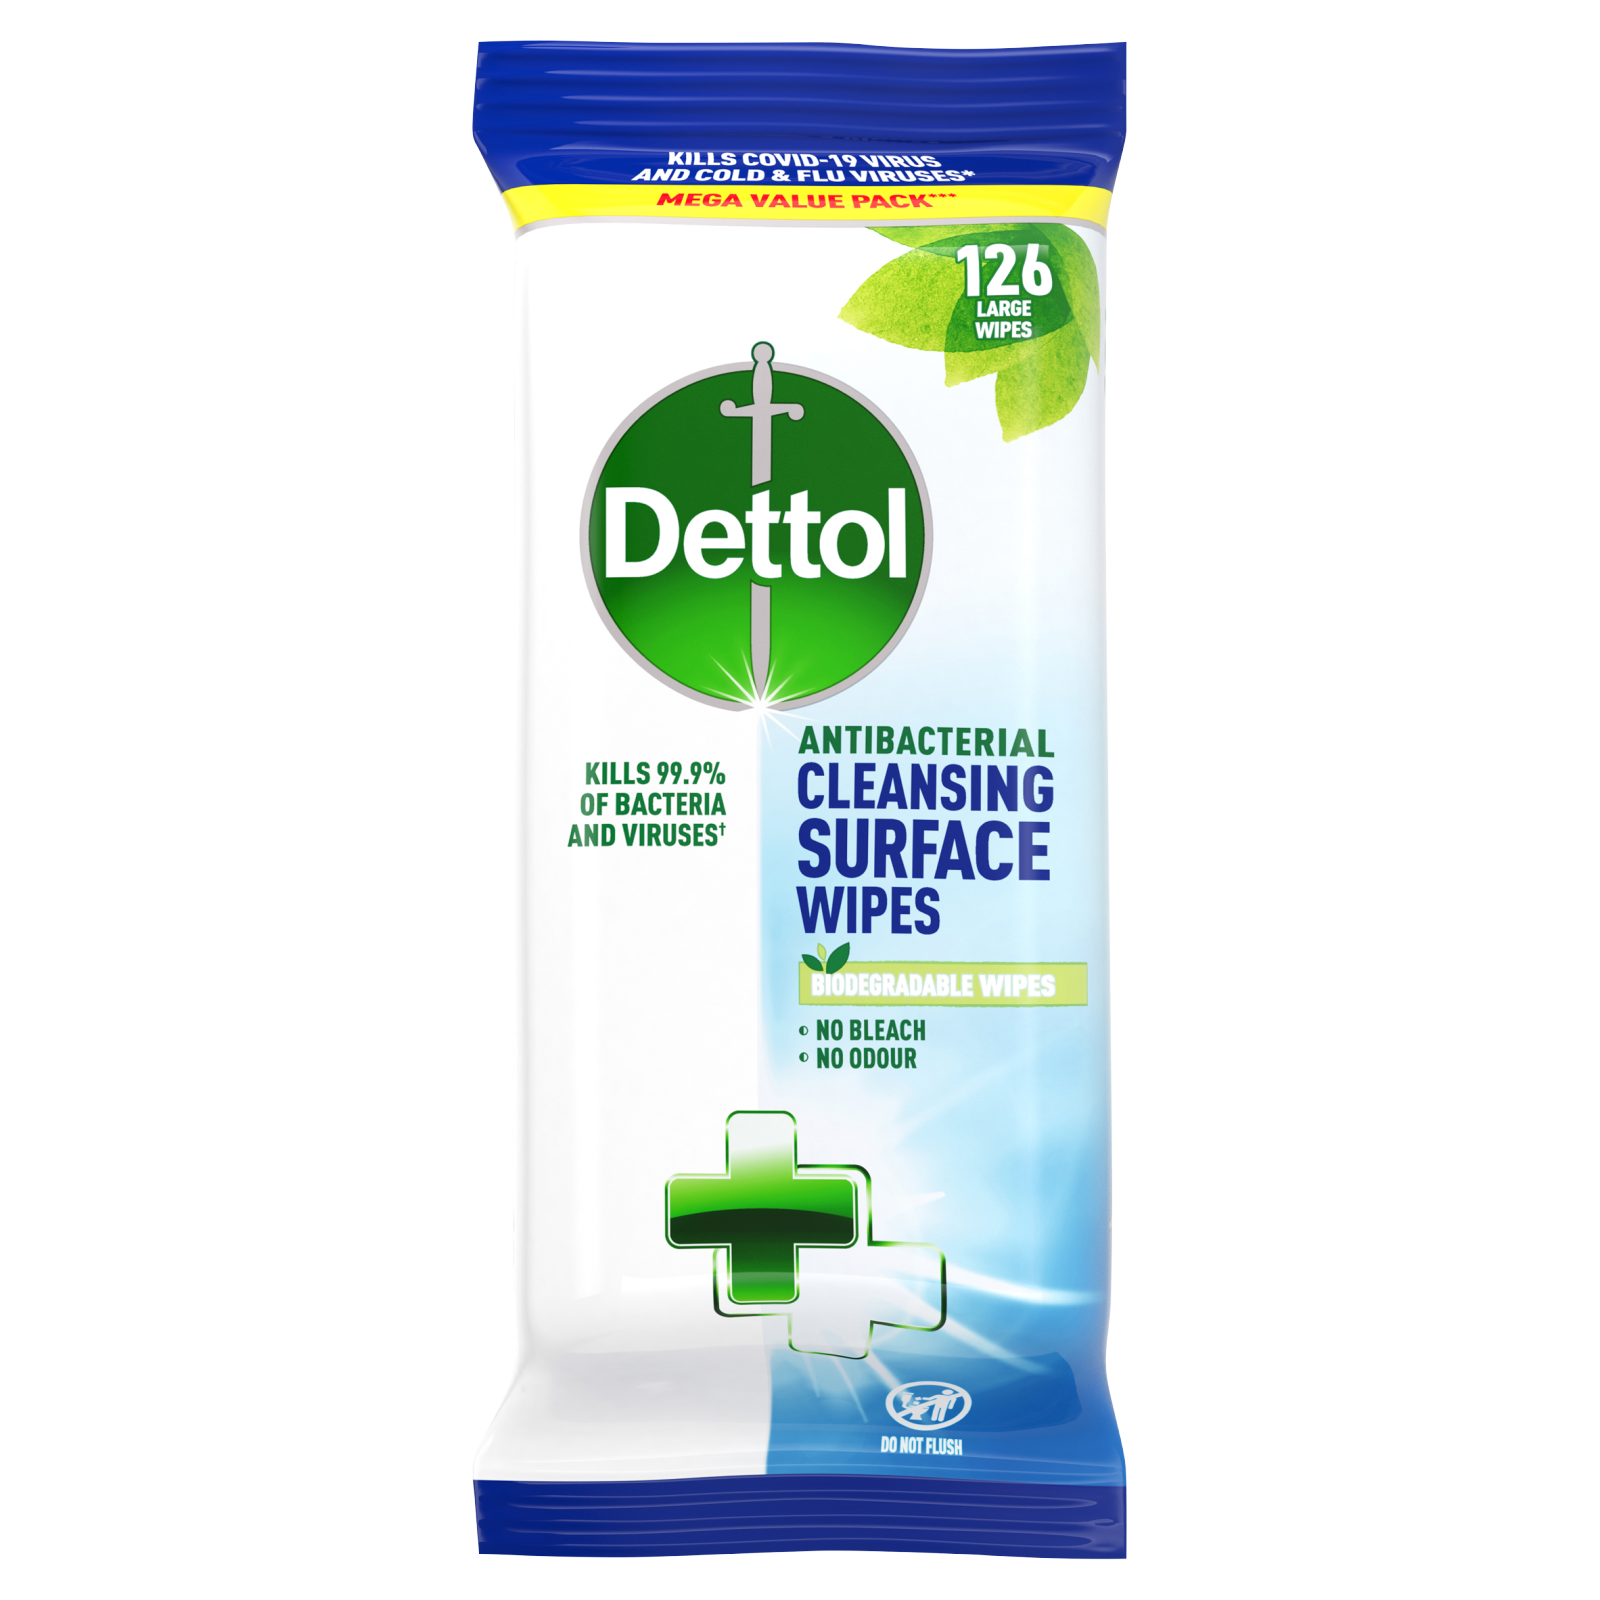 Dettol Anti-Bacterial Surface 126 Cleaning Wipes, 1pcs